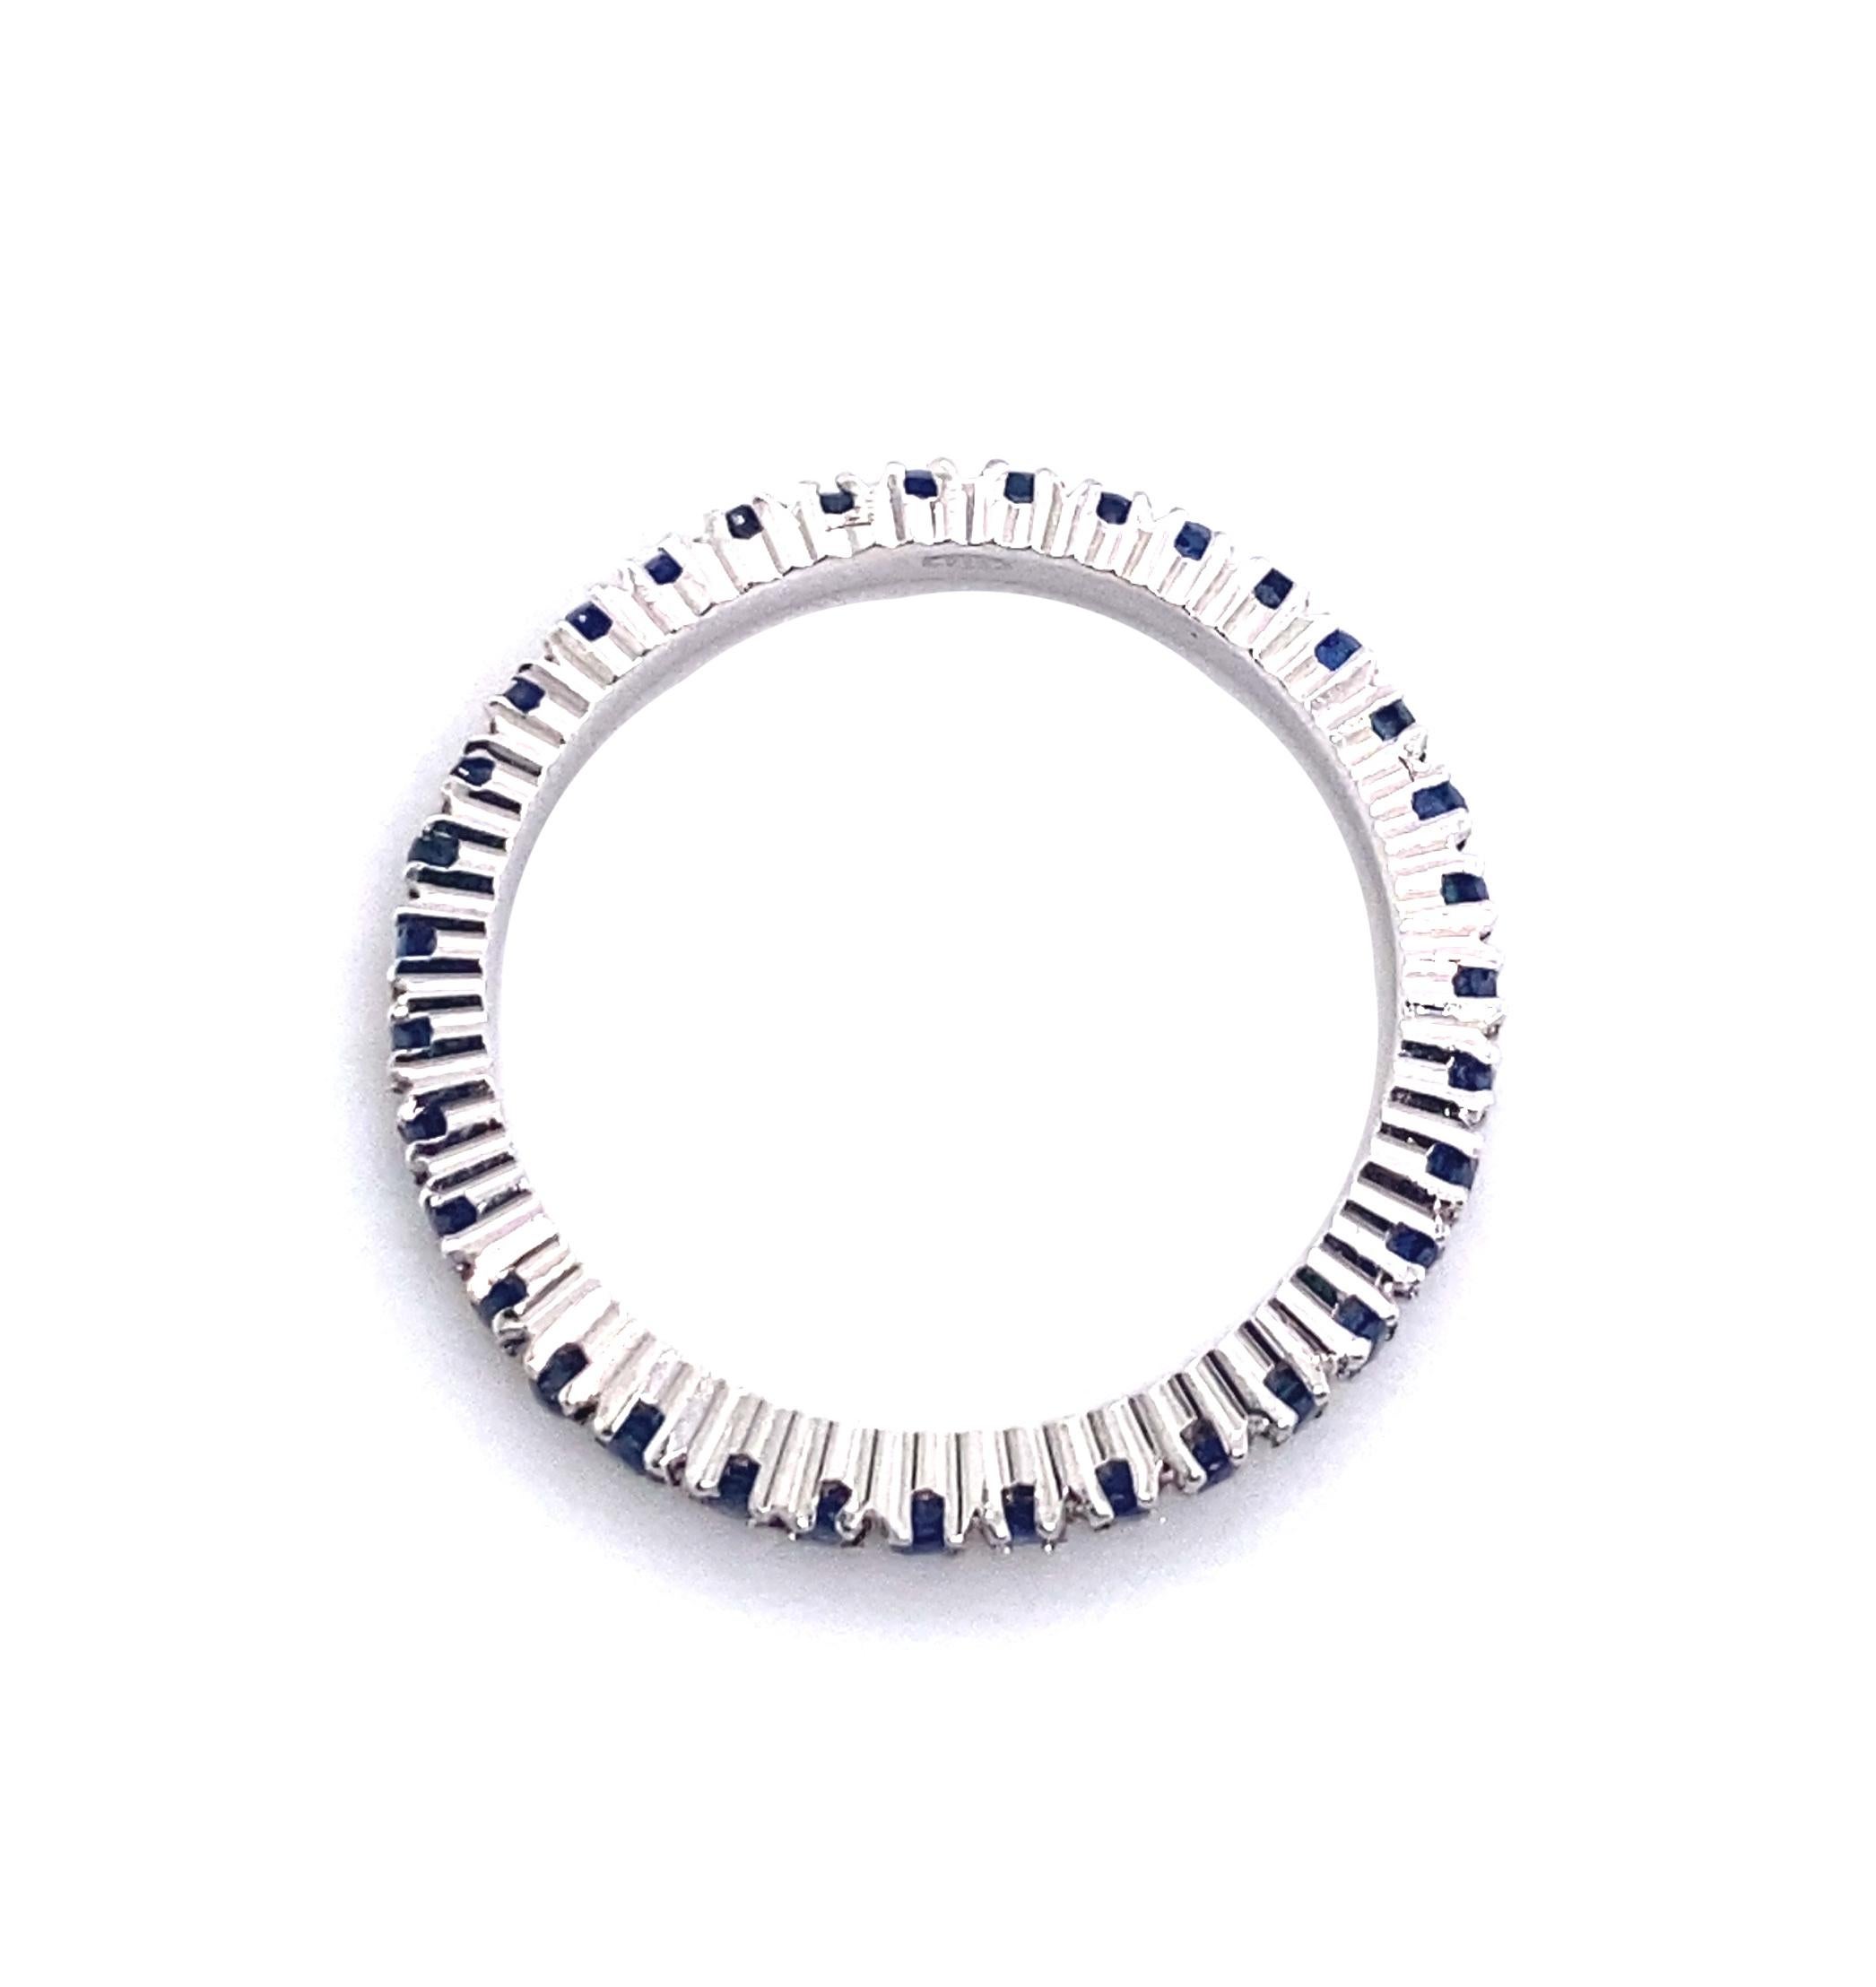 Contemporary 21st Century 18 Karat White Gold and Blue Sapphire Eternity Ring For Sale